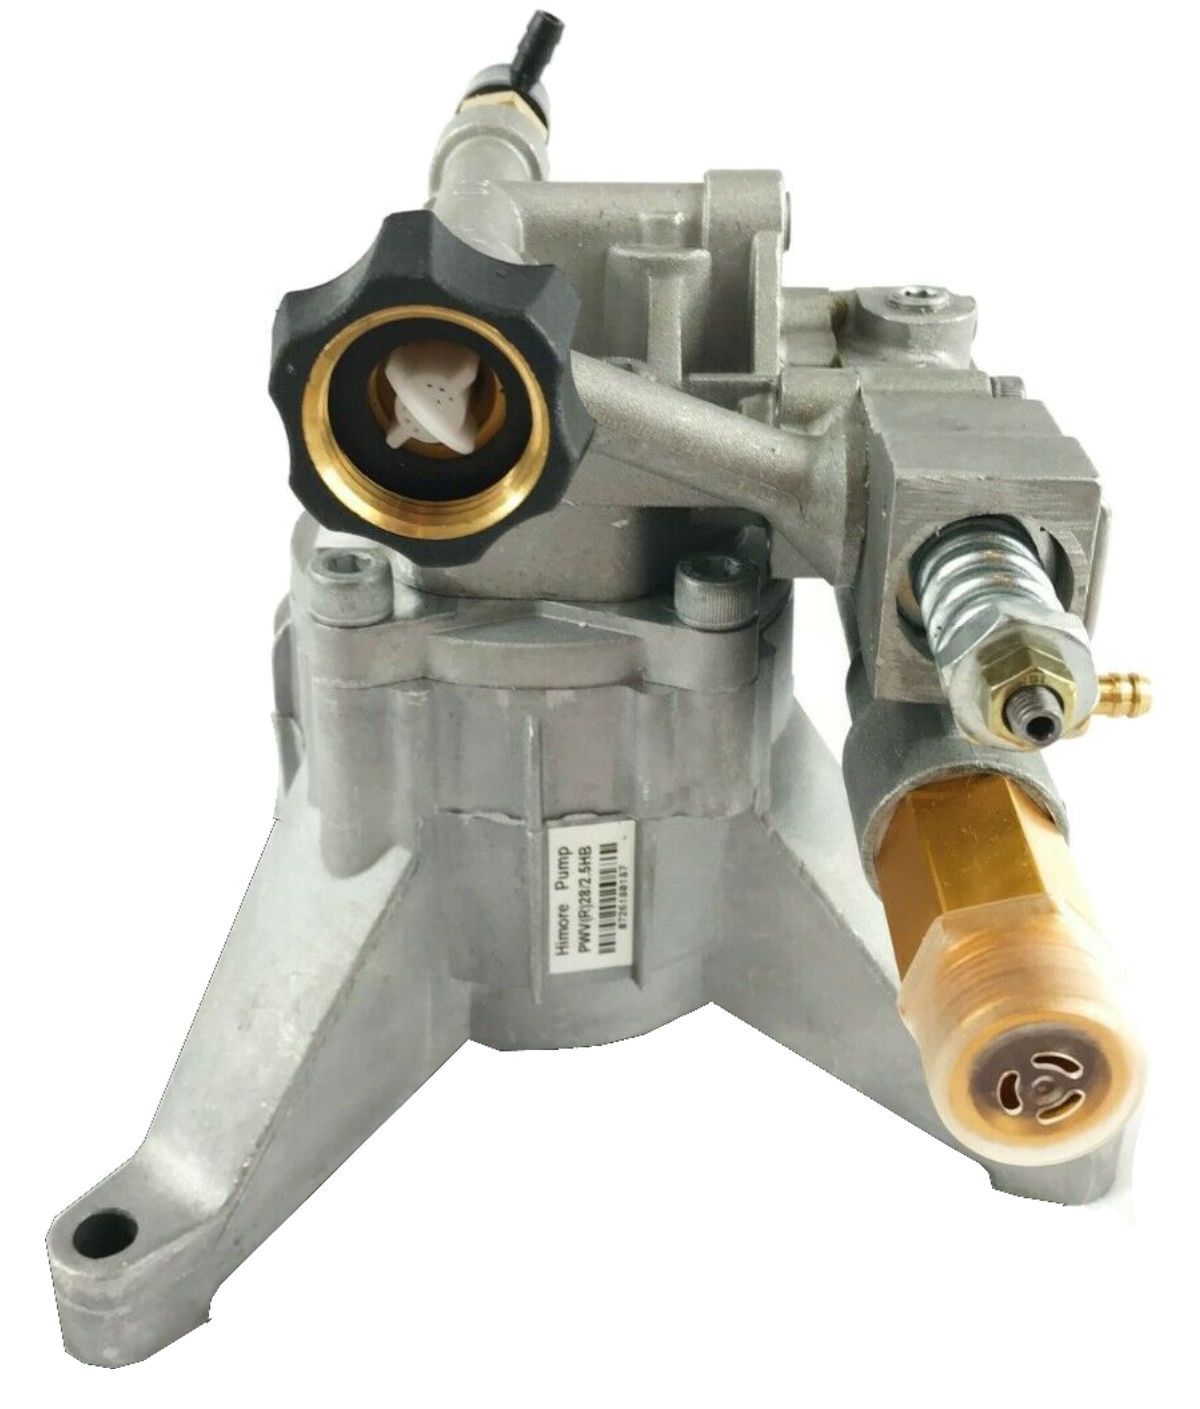 2700 PSI PRESSURE WASHER WATER PUMP Campbell Hausfeld PW1755V4LE - AE-Power